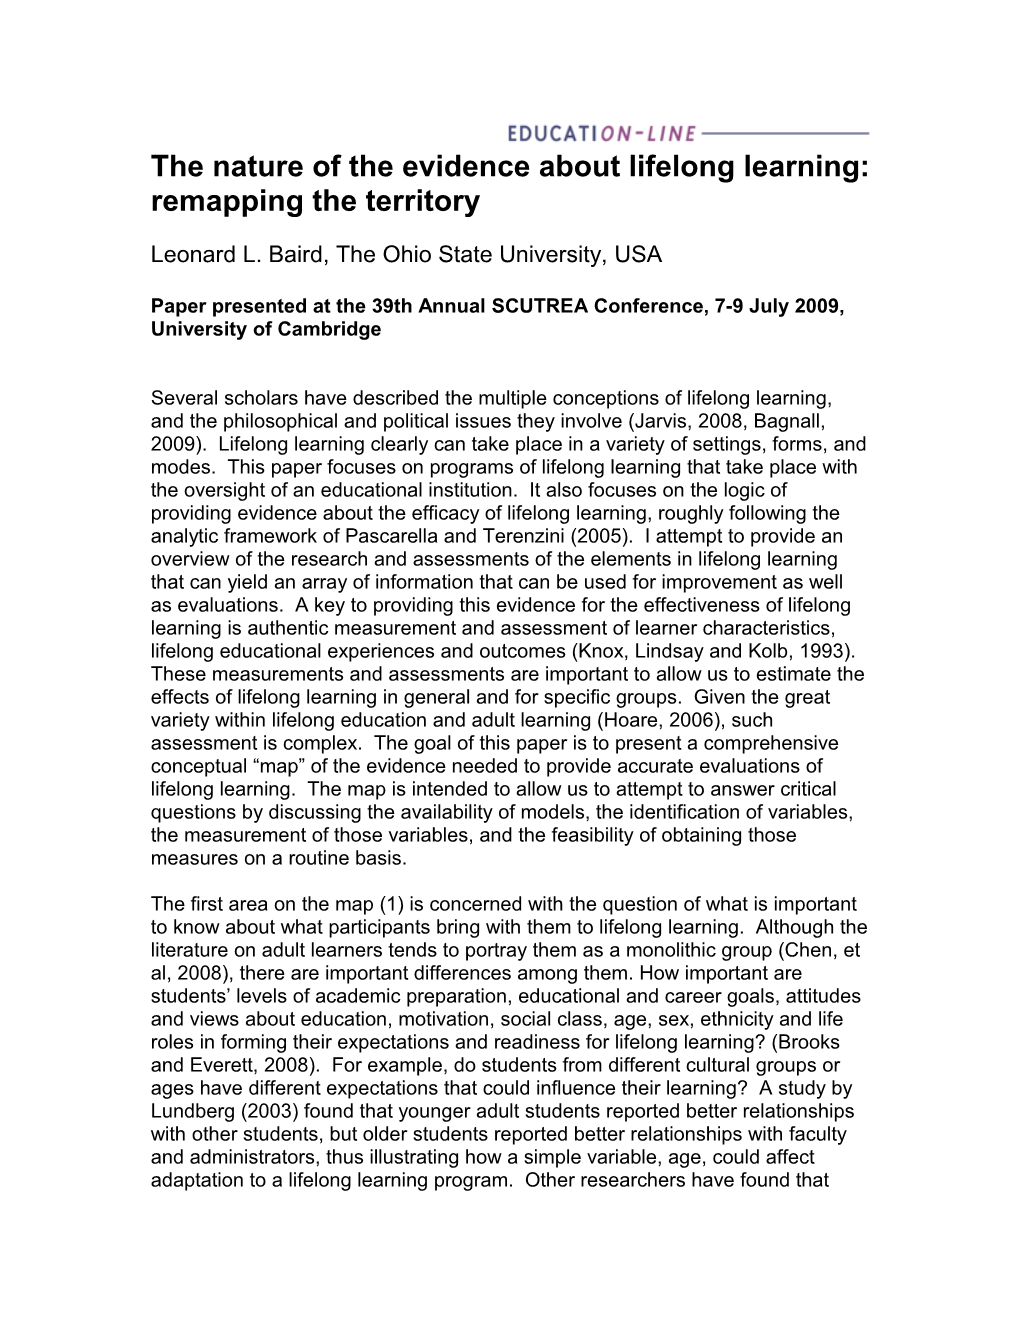 The Nature of the Evidence About Lifelong Learning: Remapping the Territory